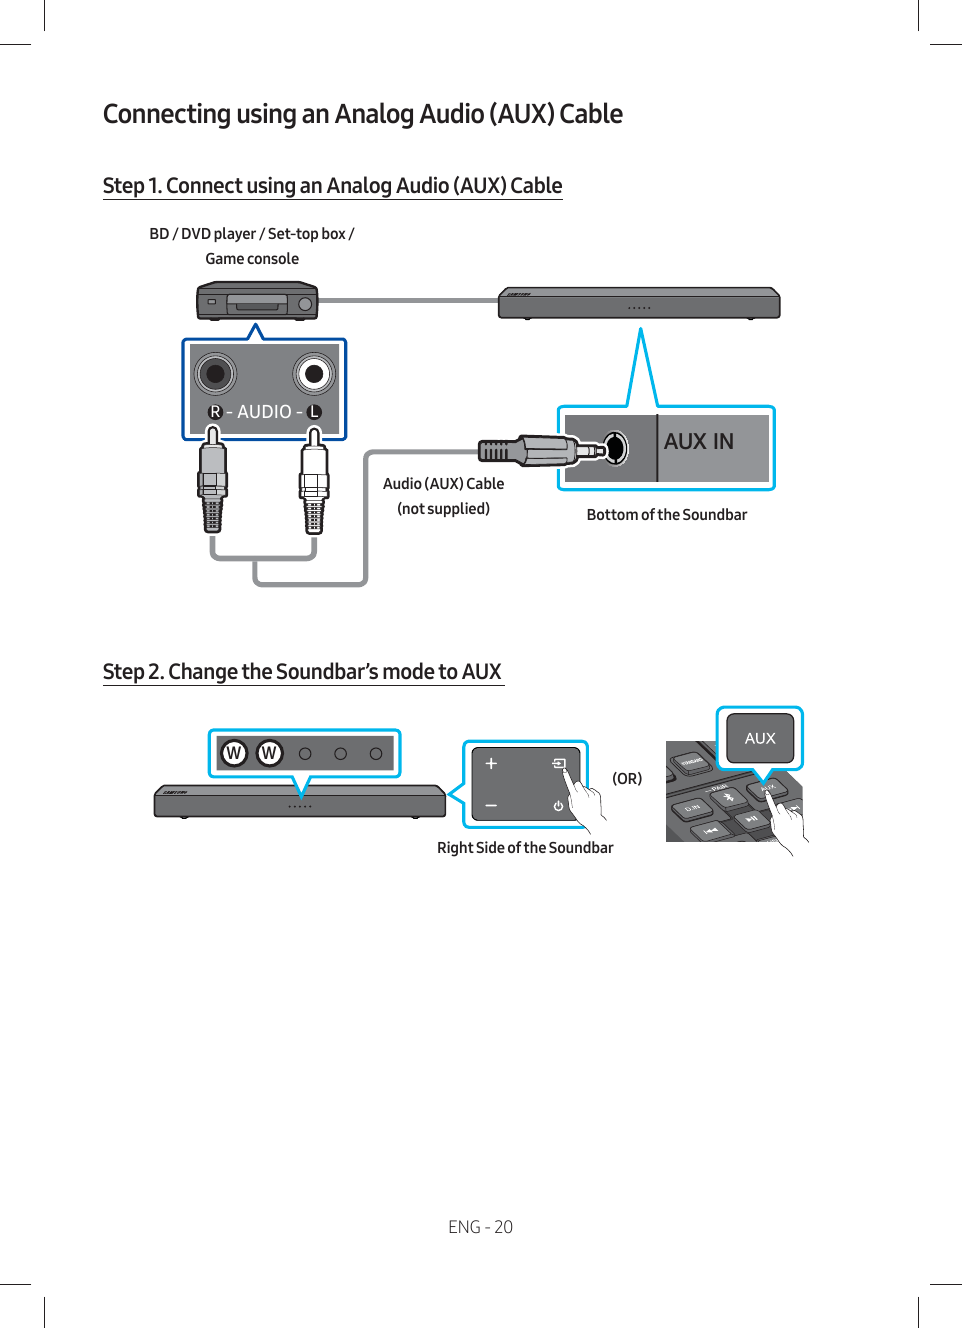 ENG - 20Connecting using an Analog Audio (AUX) CableStep 1. Connect using an Analog Audio (AUX) CableAUX INفƸUÃĮفŵ øBottom of the SoundbarAudio (AUX) Cable (not supplied)BD / DVD player / Set-top box /  Game consoleStep 2. Change the Soundbar’s mode to AUX Right Side of the Soundbar(OR)W W